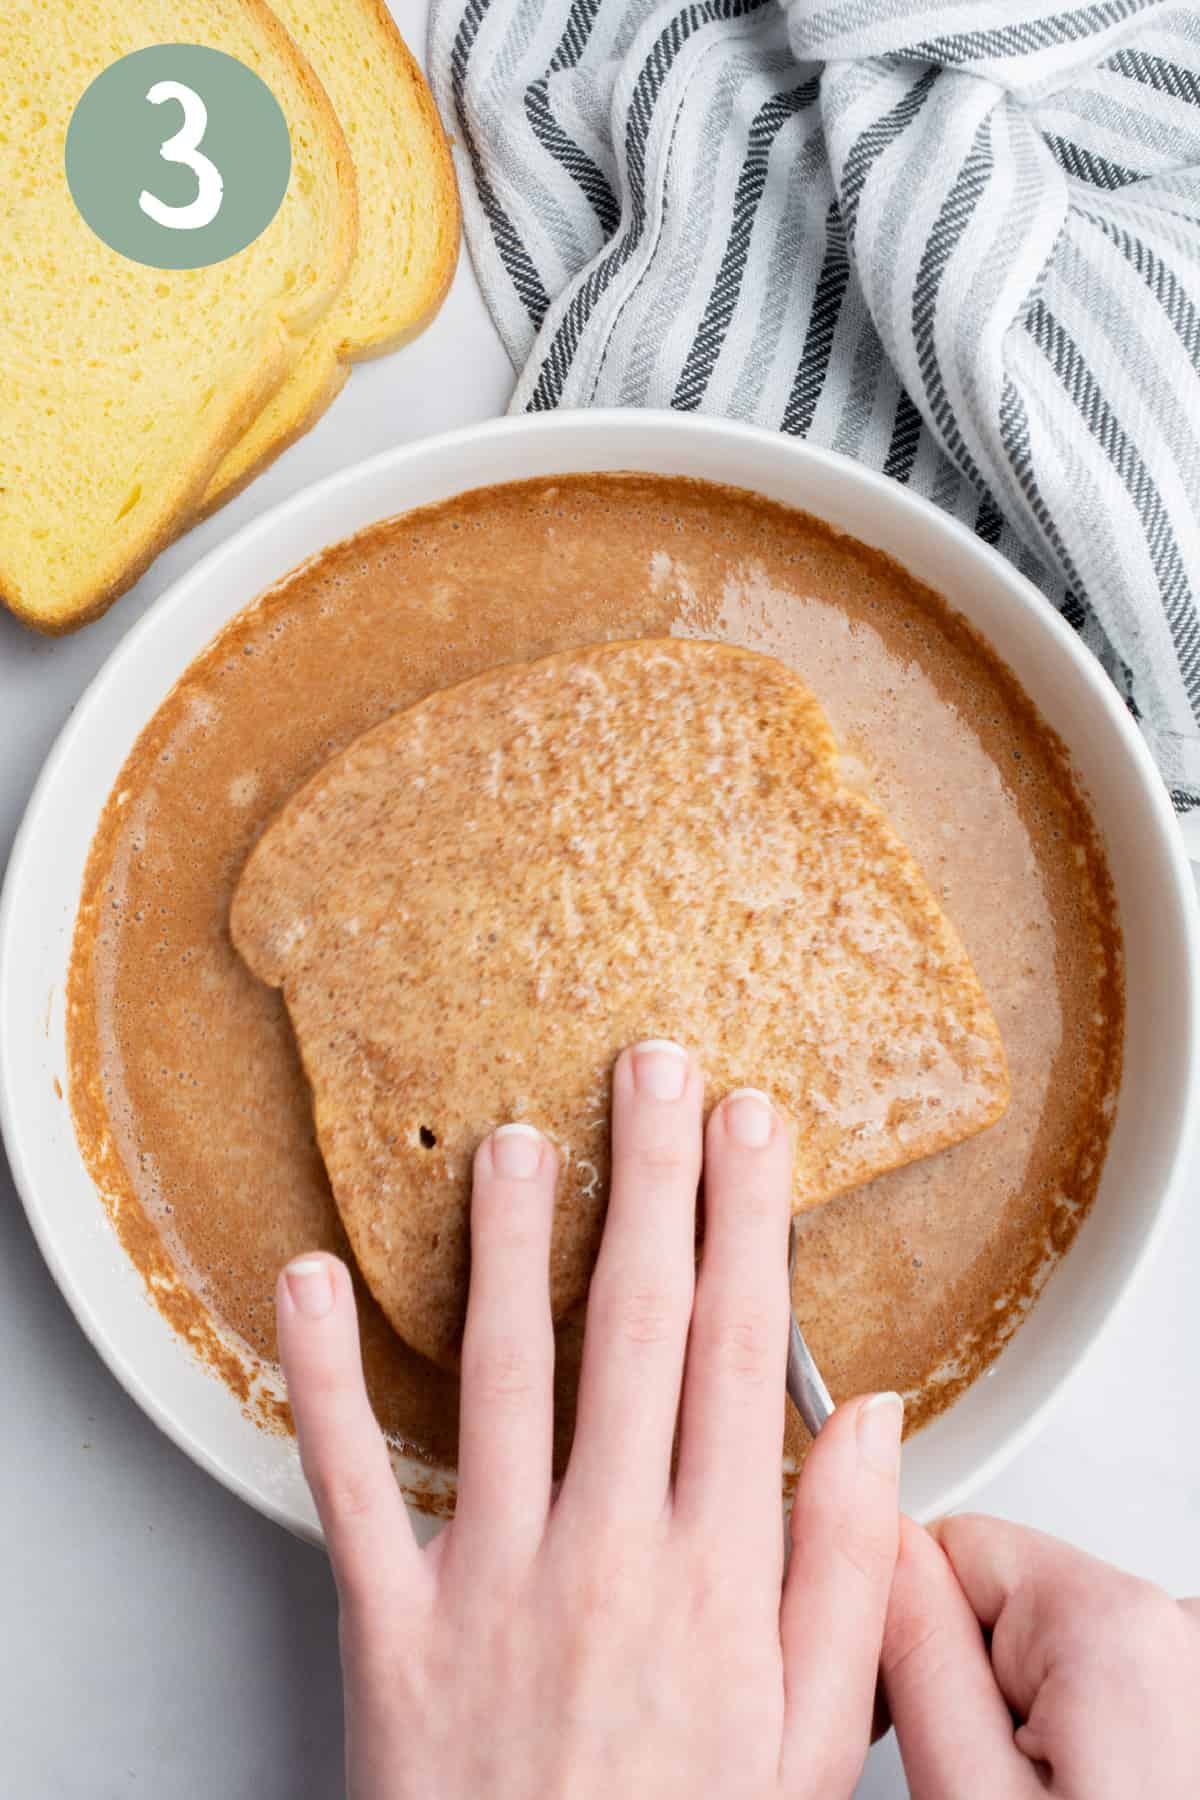 A slice of bread on a fork with a hand dipping it in a bowl of batter.